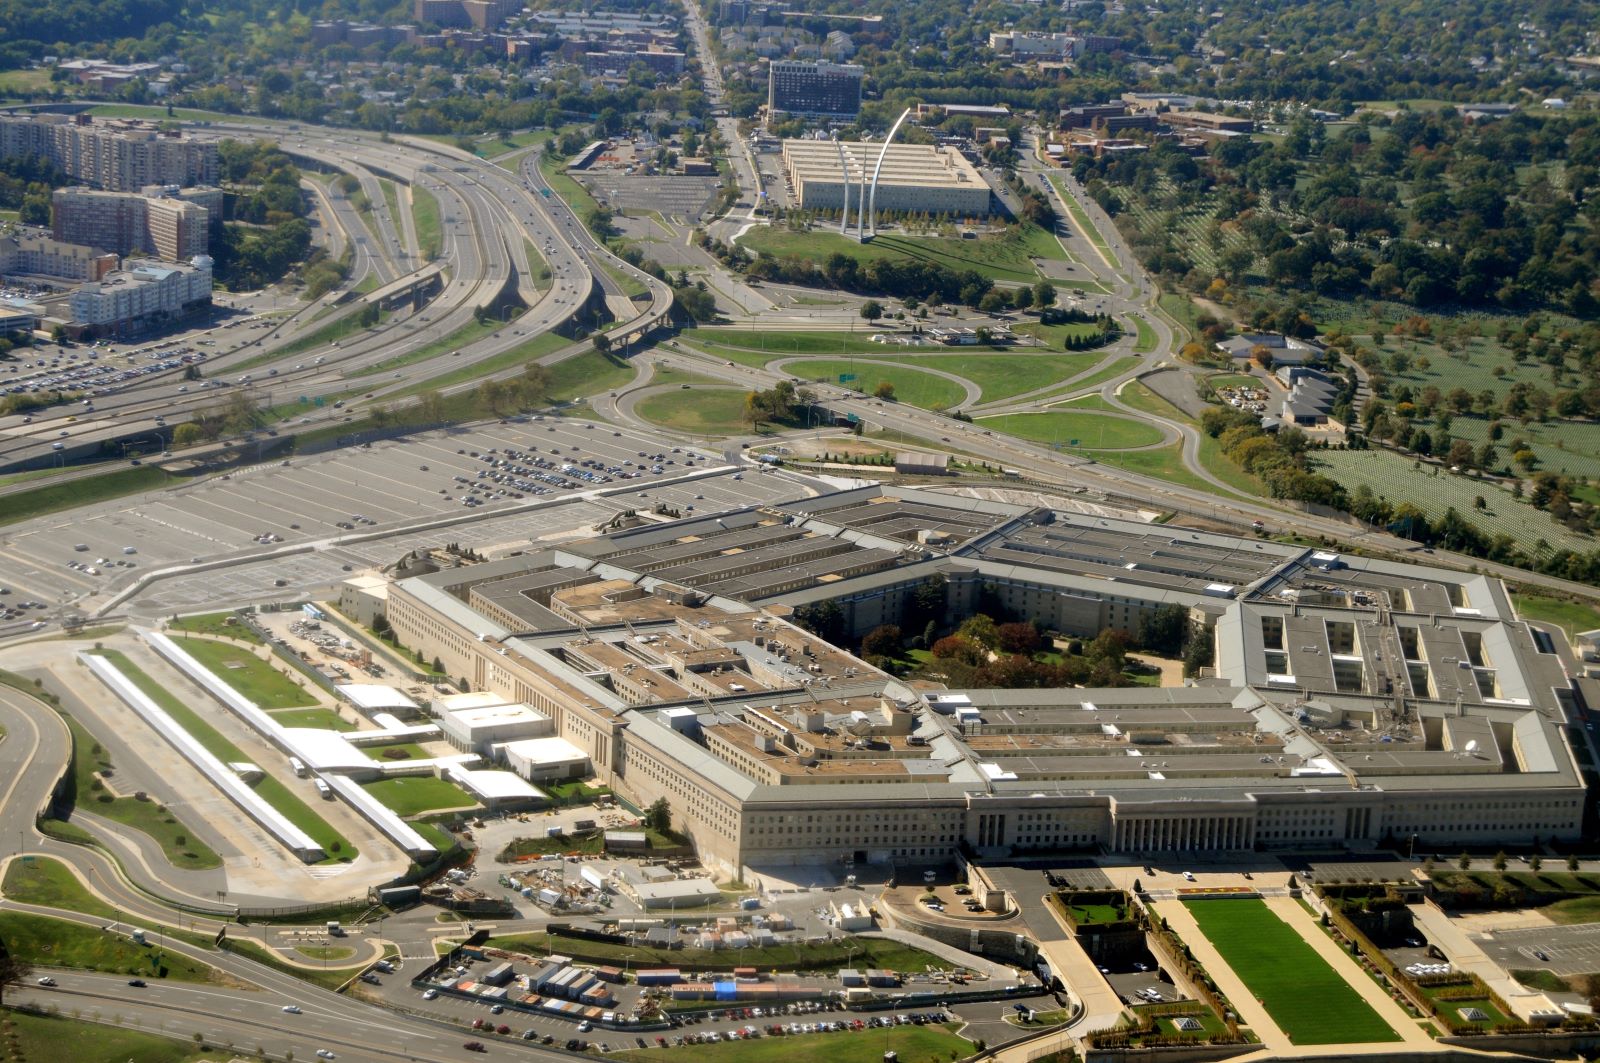 <p class="wp-caption-text">Image Credit: Shutterstock / Frontpage</p>  <p>A symbol of U.S. military strength, the Pentagon offers tours that delve into the complexities of America’s defense administration.</p>